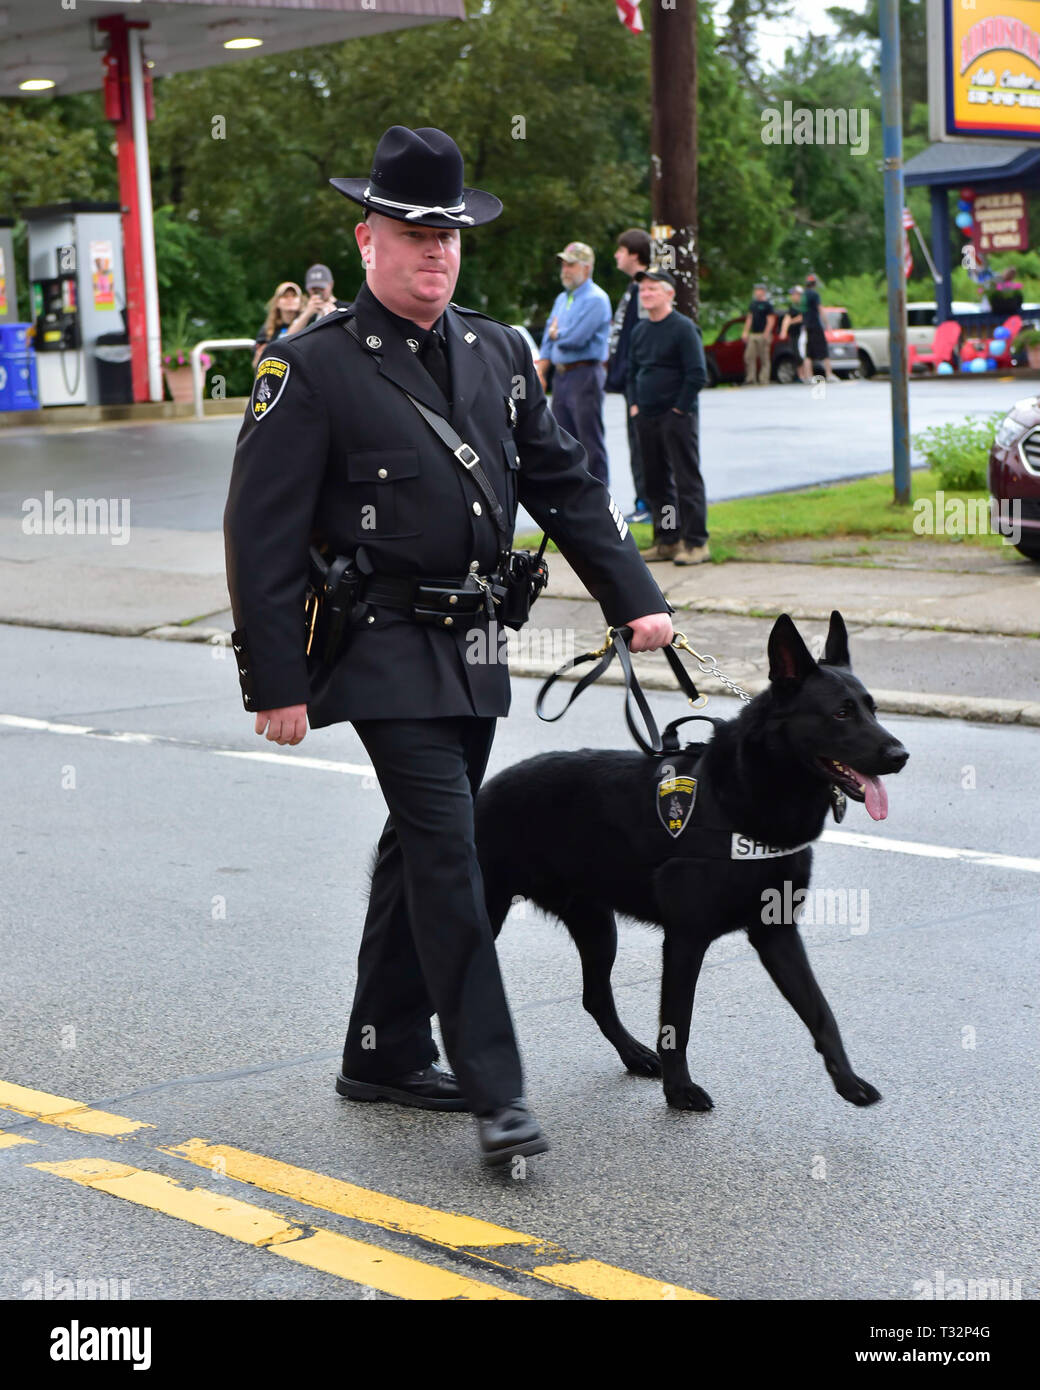 A police officer marching in the 4th of July parade with his K-9 police dog in Speculator, NY USA Stock Photo